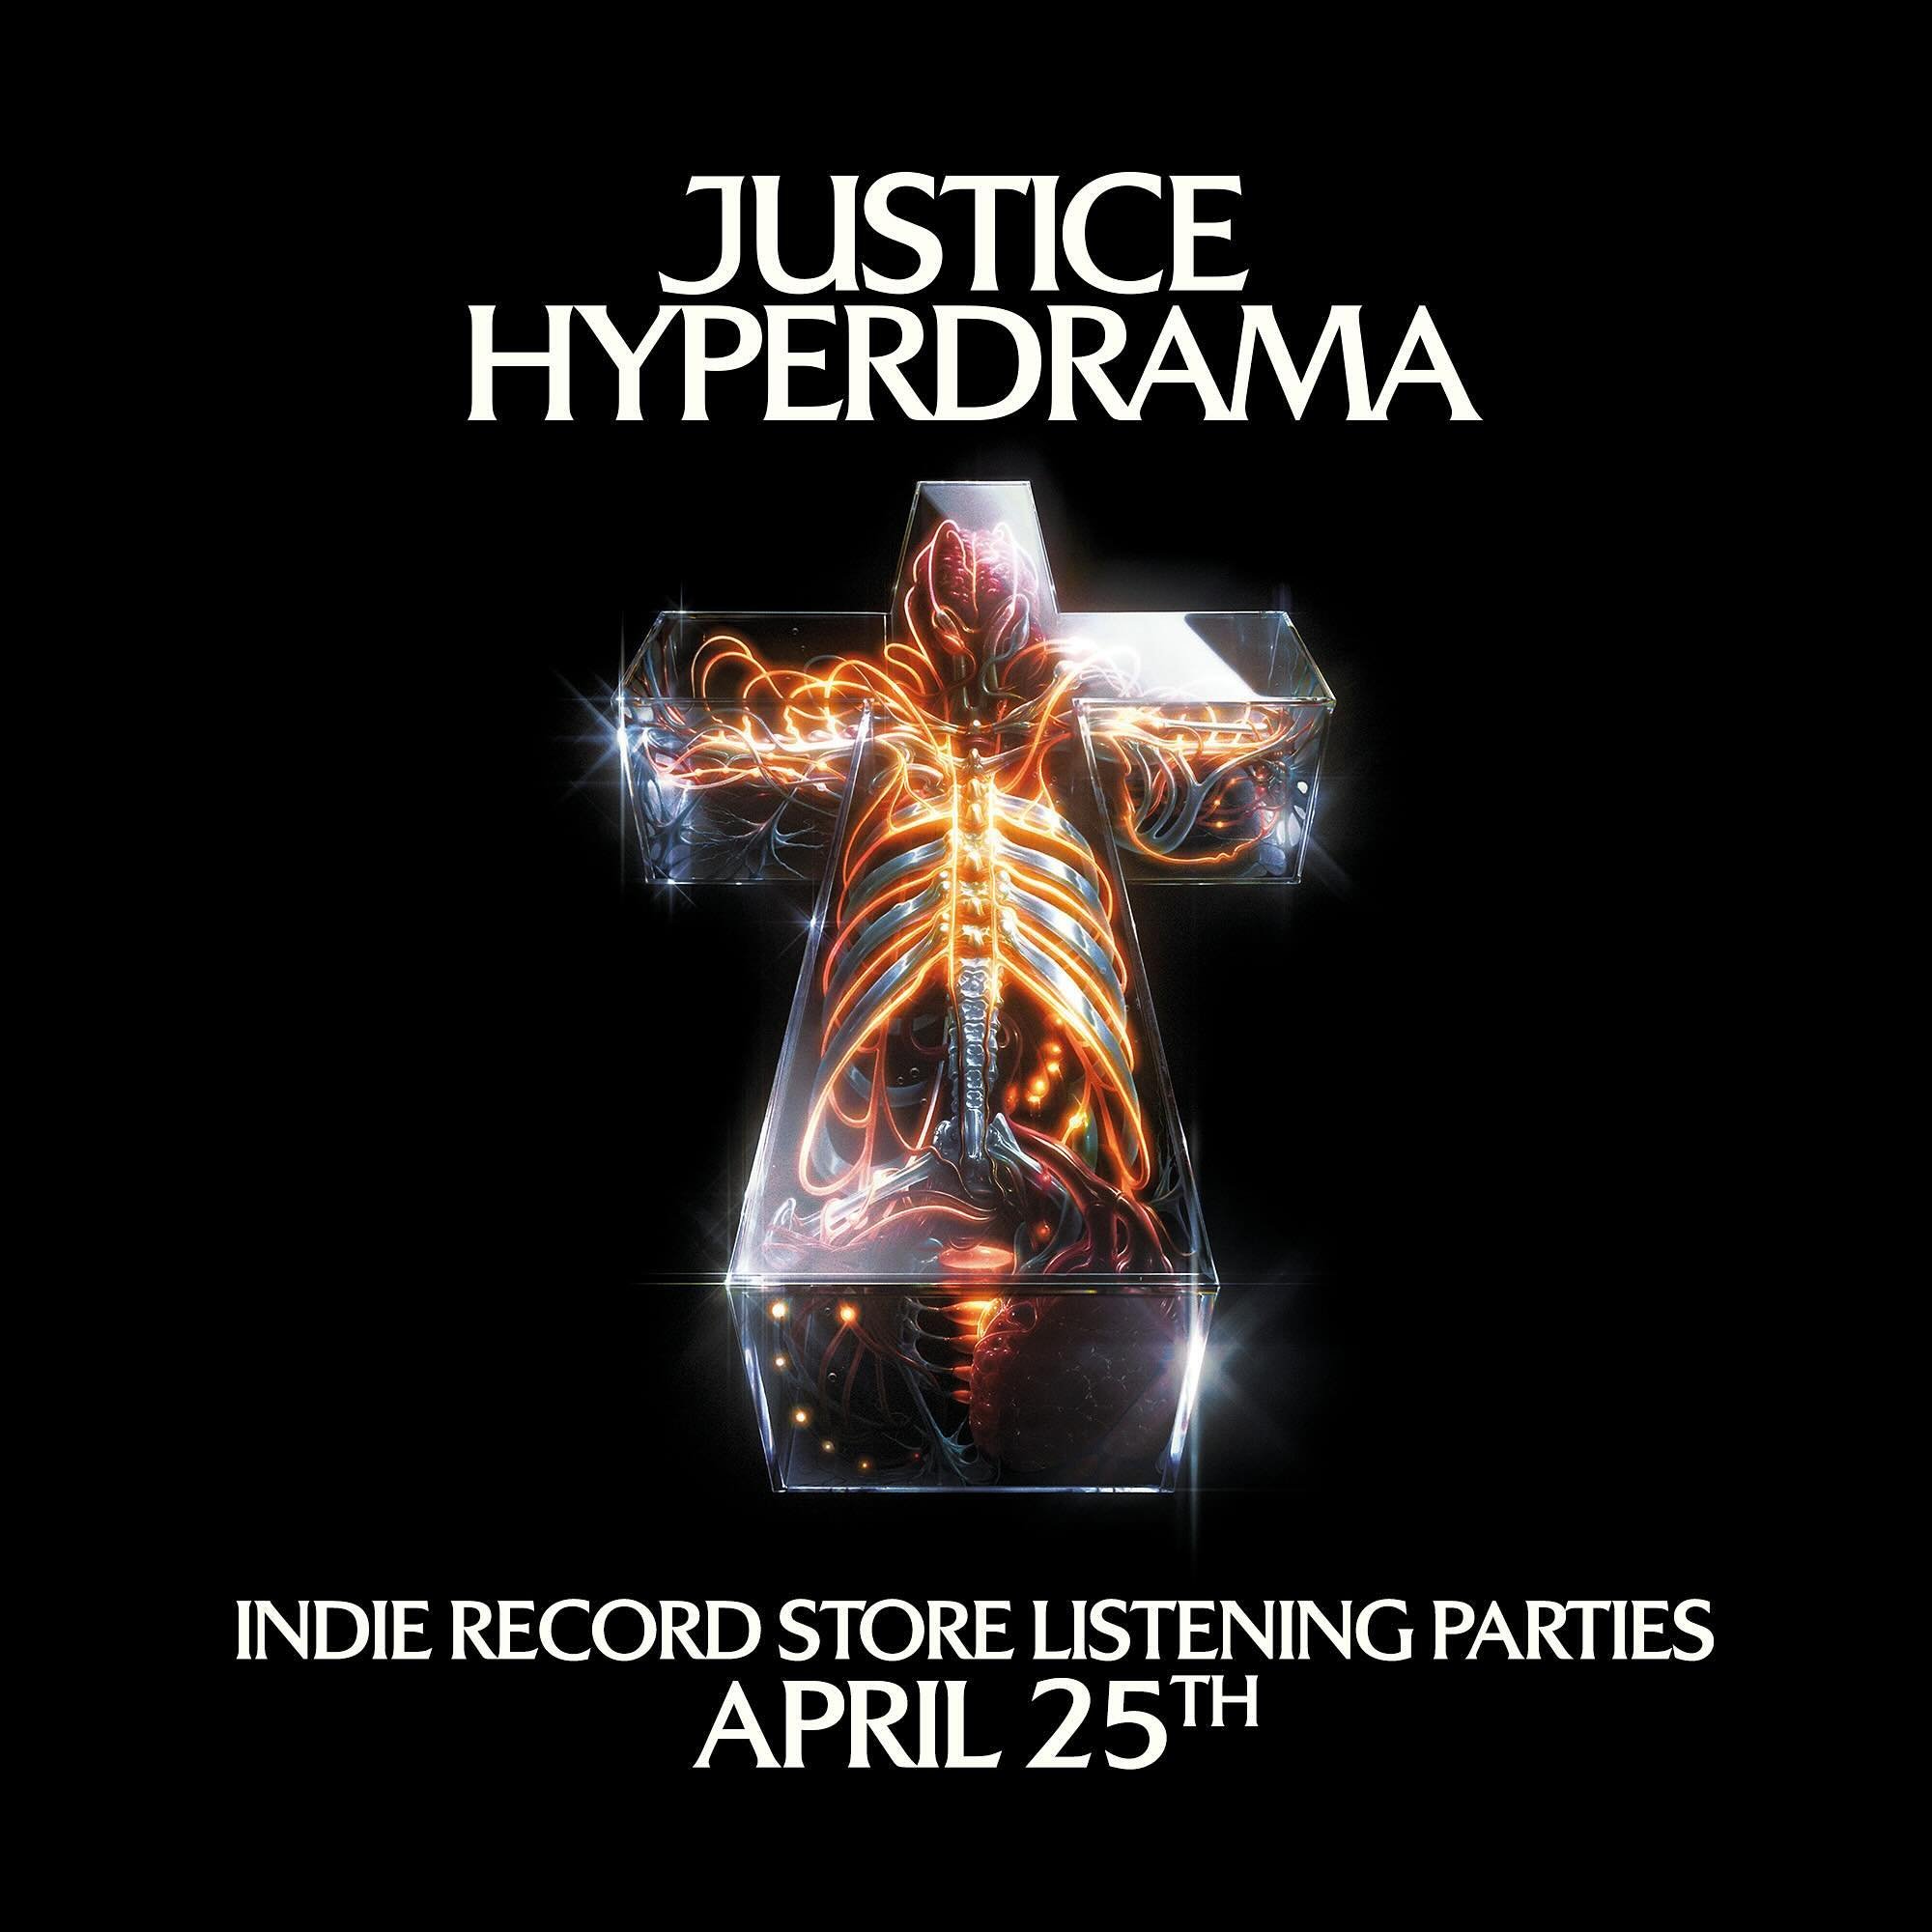 Reminder to Join us on the eve of HYPERDRAMA to be the first to hear the new album from Justice - Thursday, April 25 @ 7pm - Each attendee must RSVP via the link in our bio. We will have some cool Justice Giveways, while supplies last! See ya Thursda